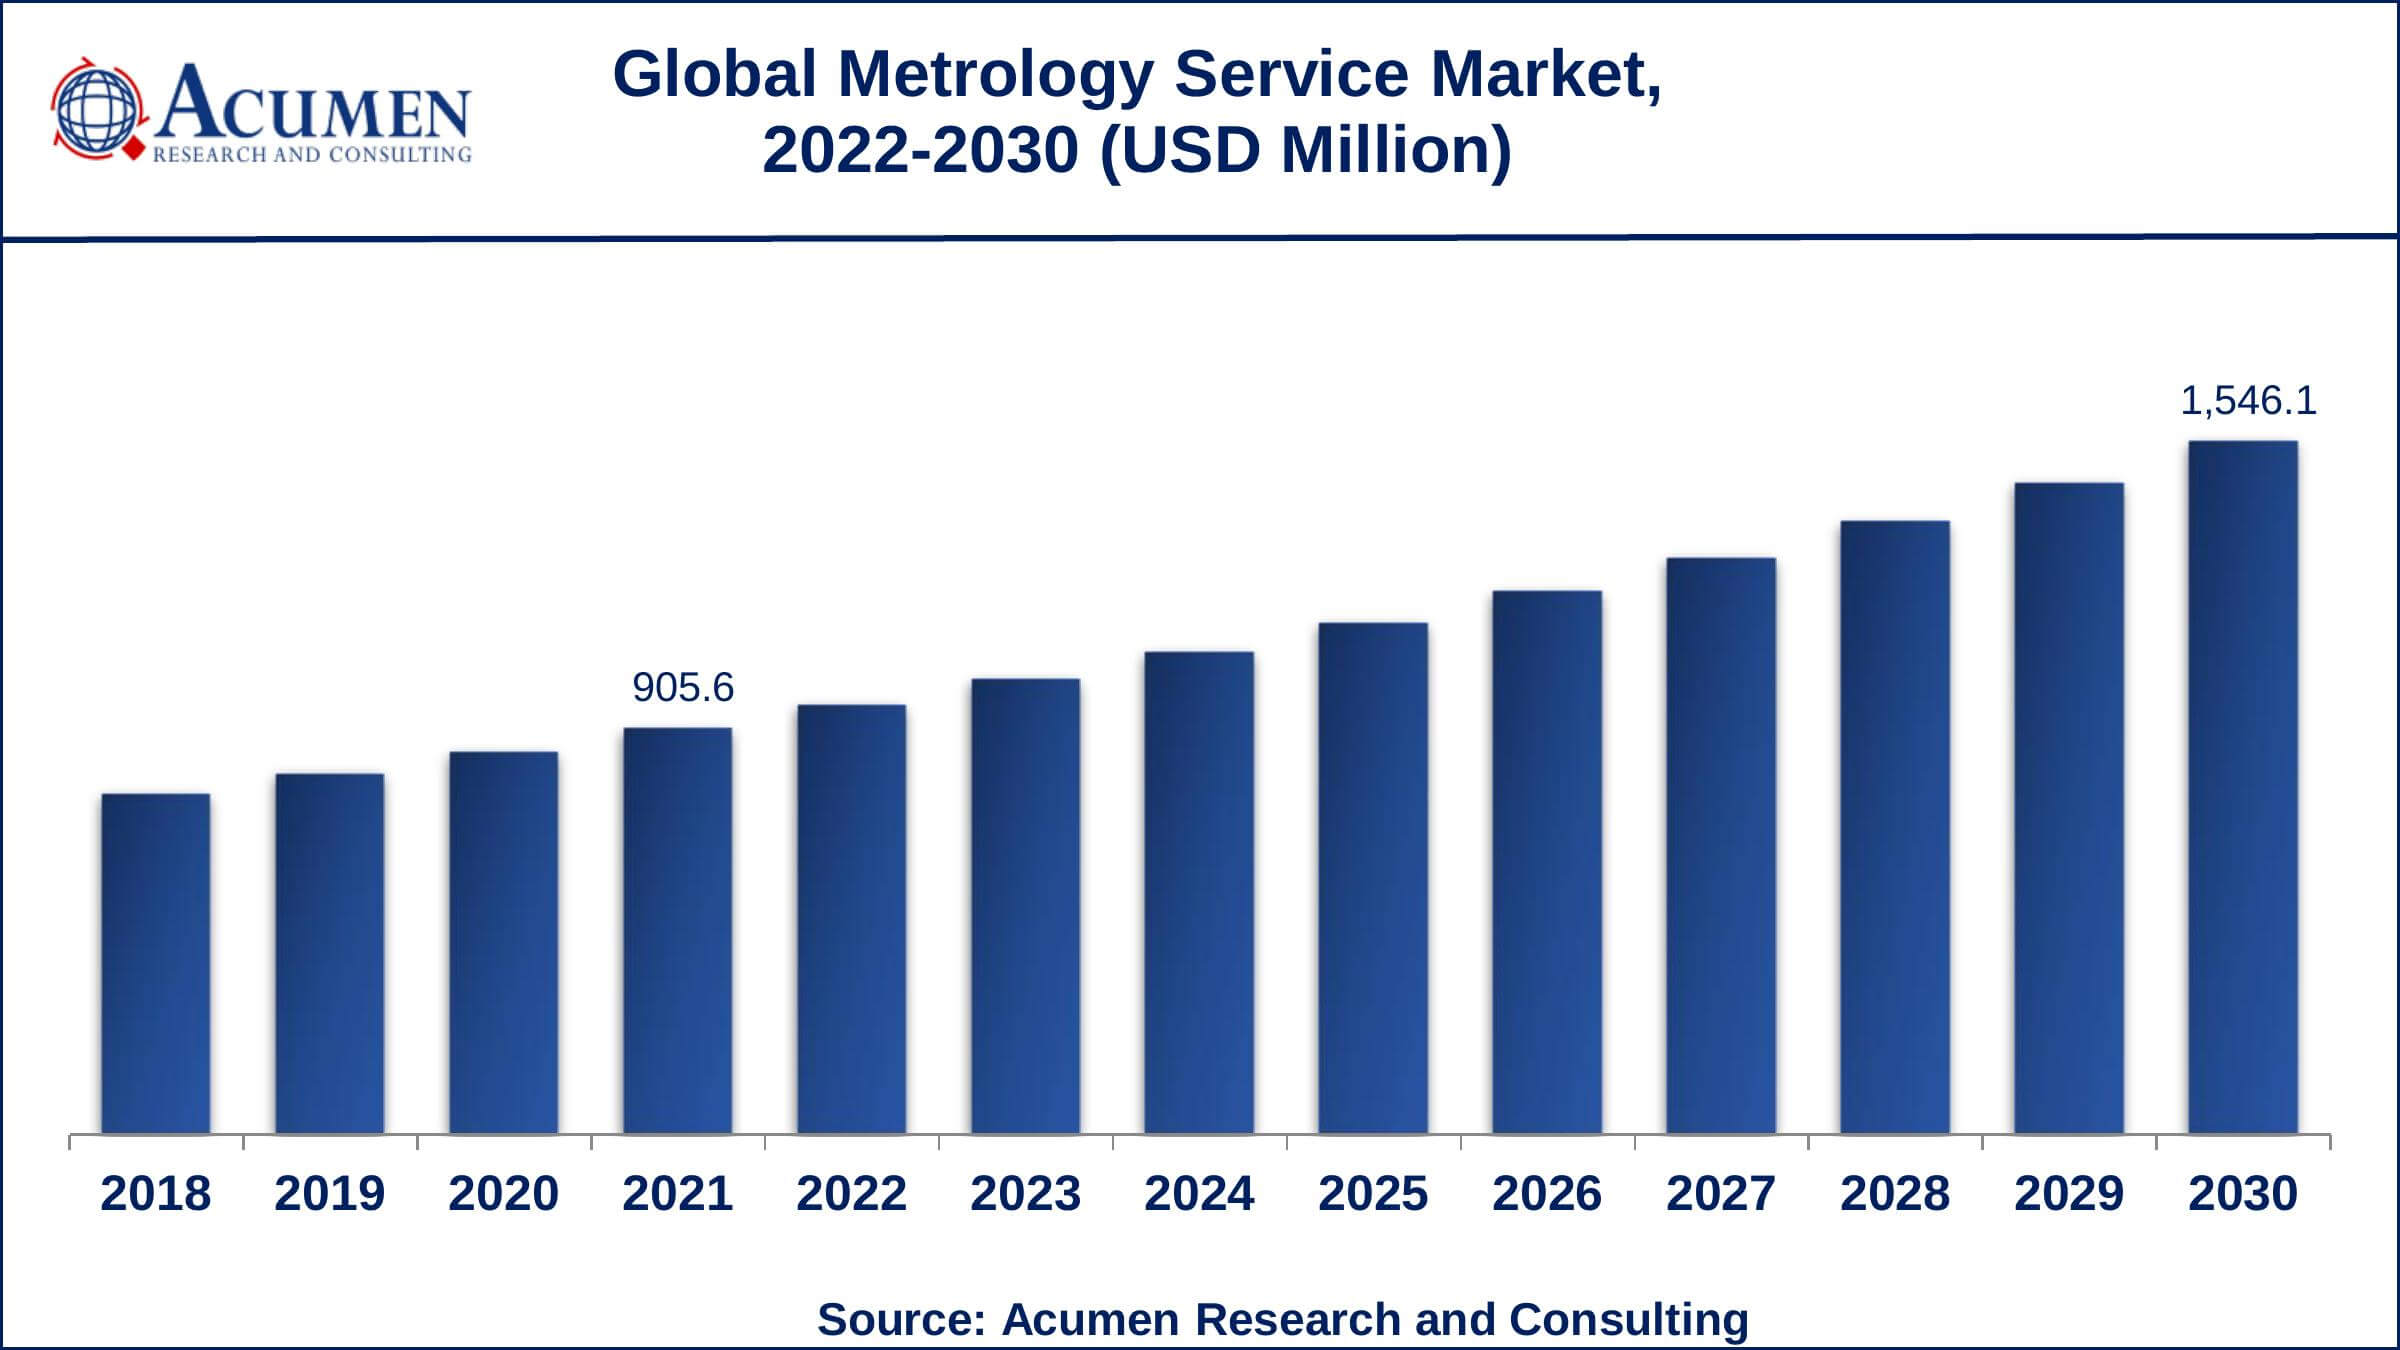 Global metrology service market revenue is estimated to reach USD 1,546.1 Million by 2030 with a CAGR of 6.2% from 2022 to 2030